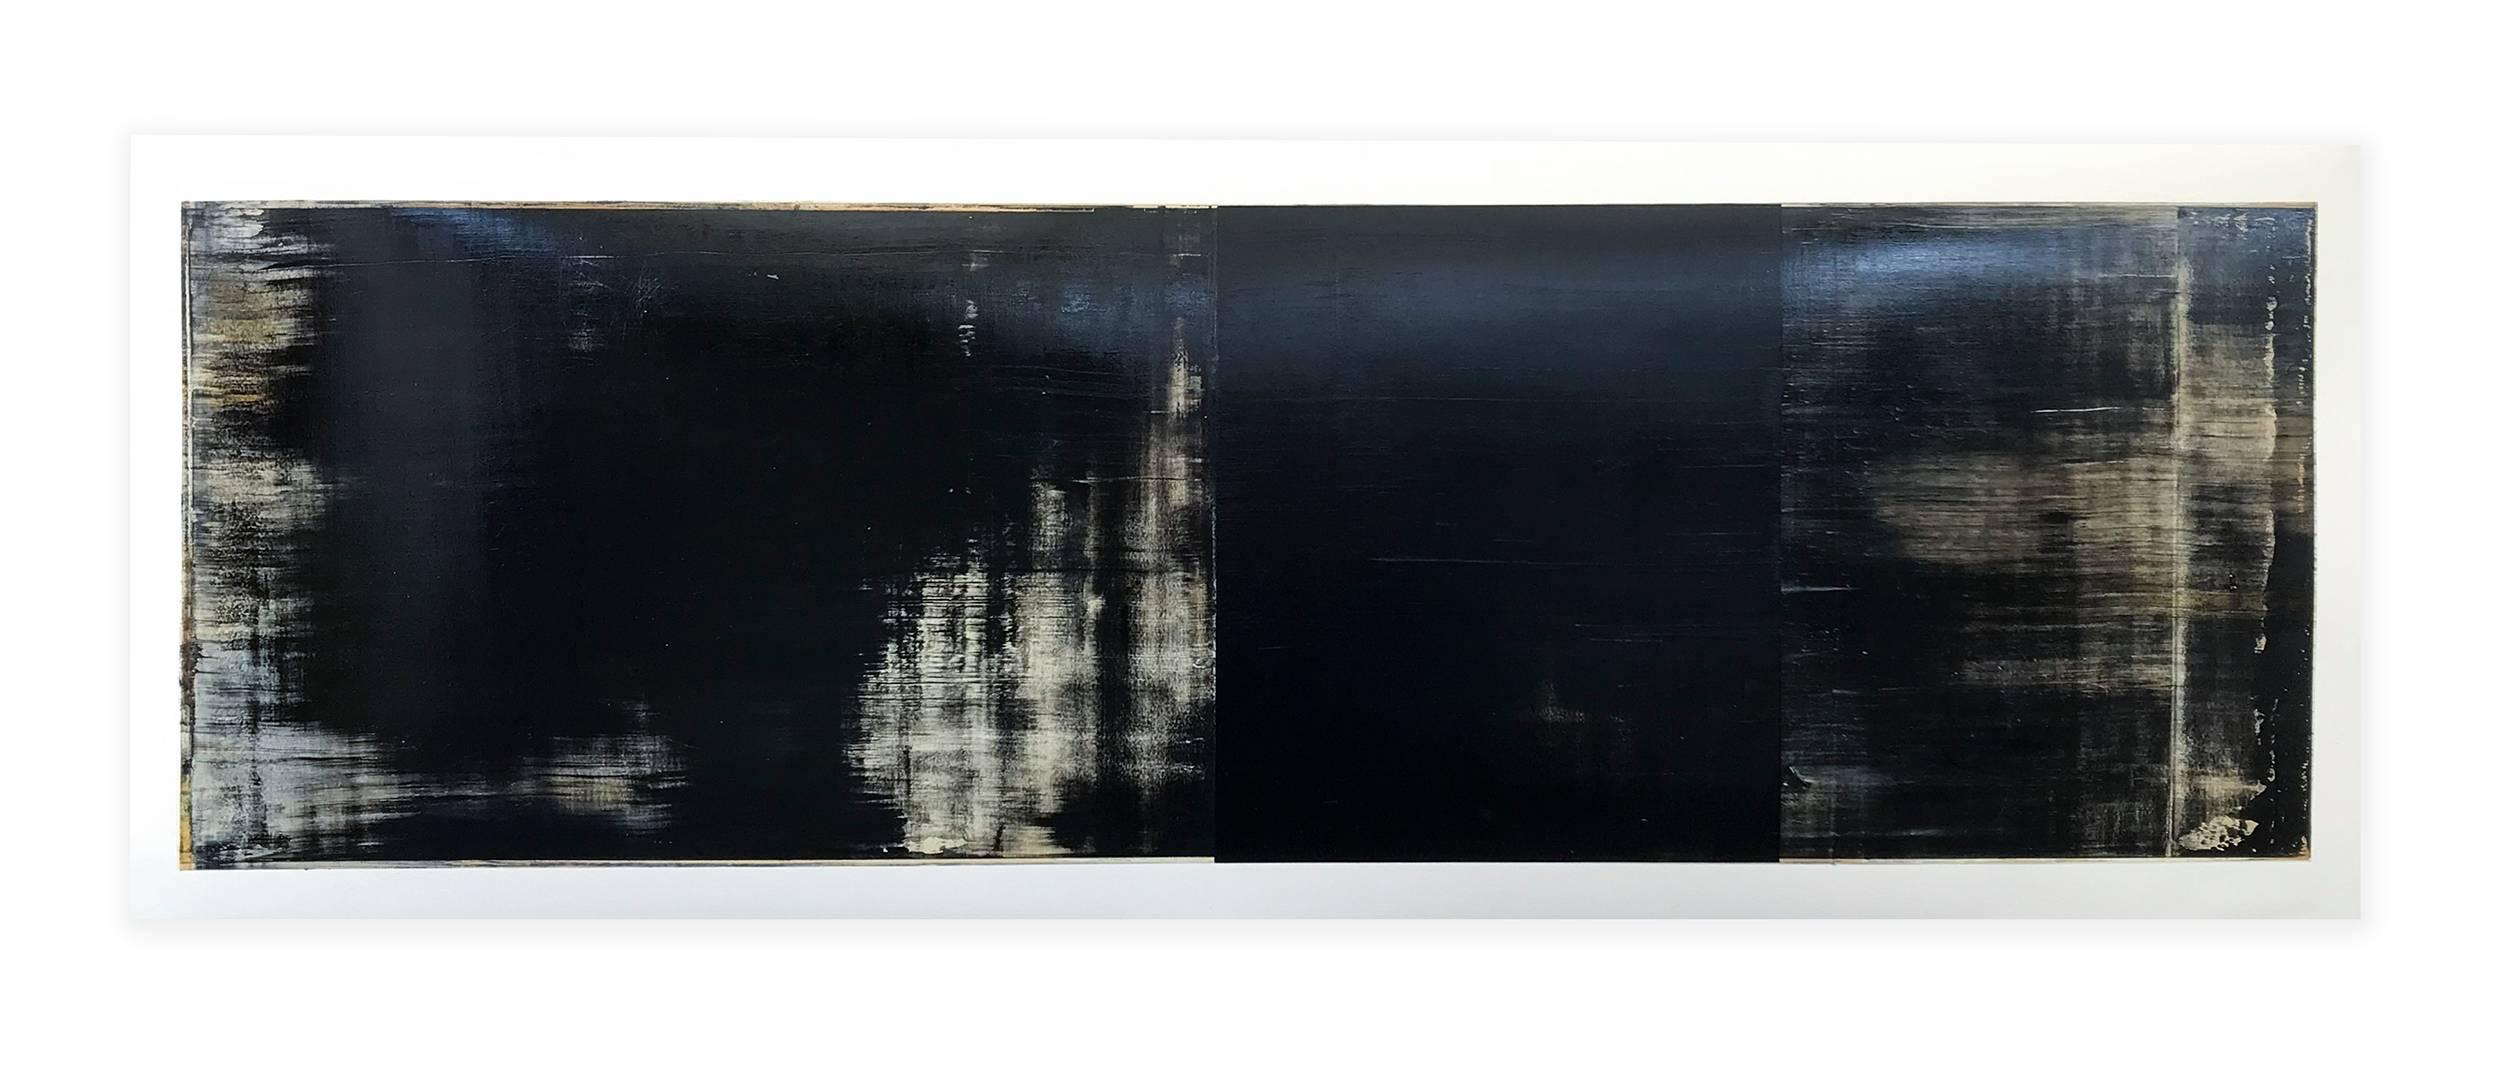 Daniel Brice, Untitled (OX 45), 2017, oil on paper, 18 x 51 inches, abstract, color field painting on Arches archival paper specifically made for oil paint. This piece is black and white. 

In the lineage of historic artists interpreting western